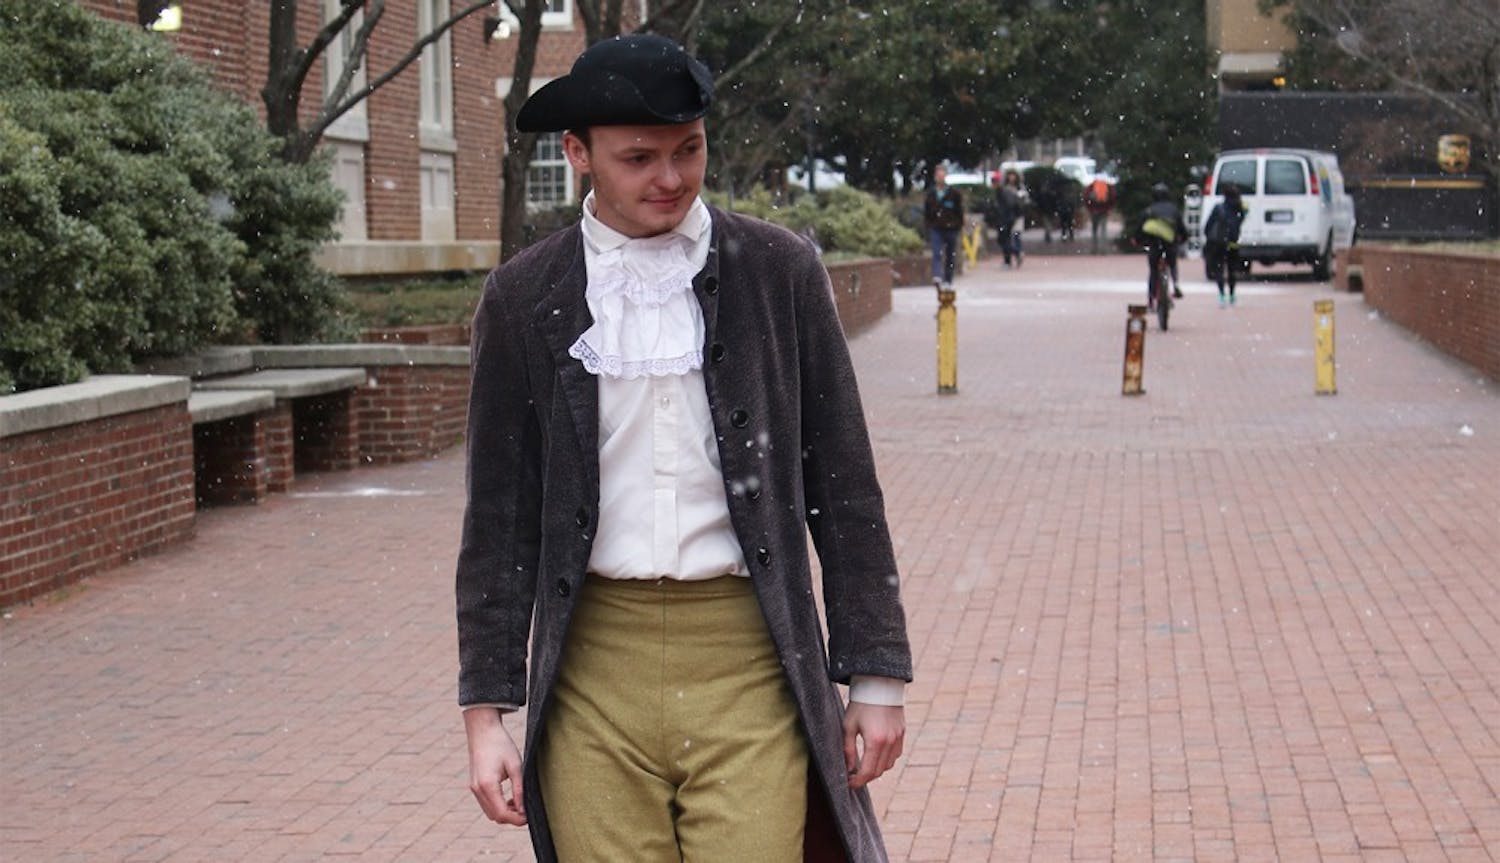 UNC celebrated Hinton James Day in honor of Hinton James, the university’s first student, on Friday. Michael Ham dressed as James.